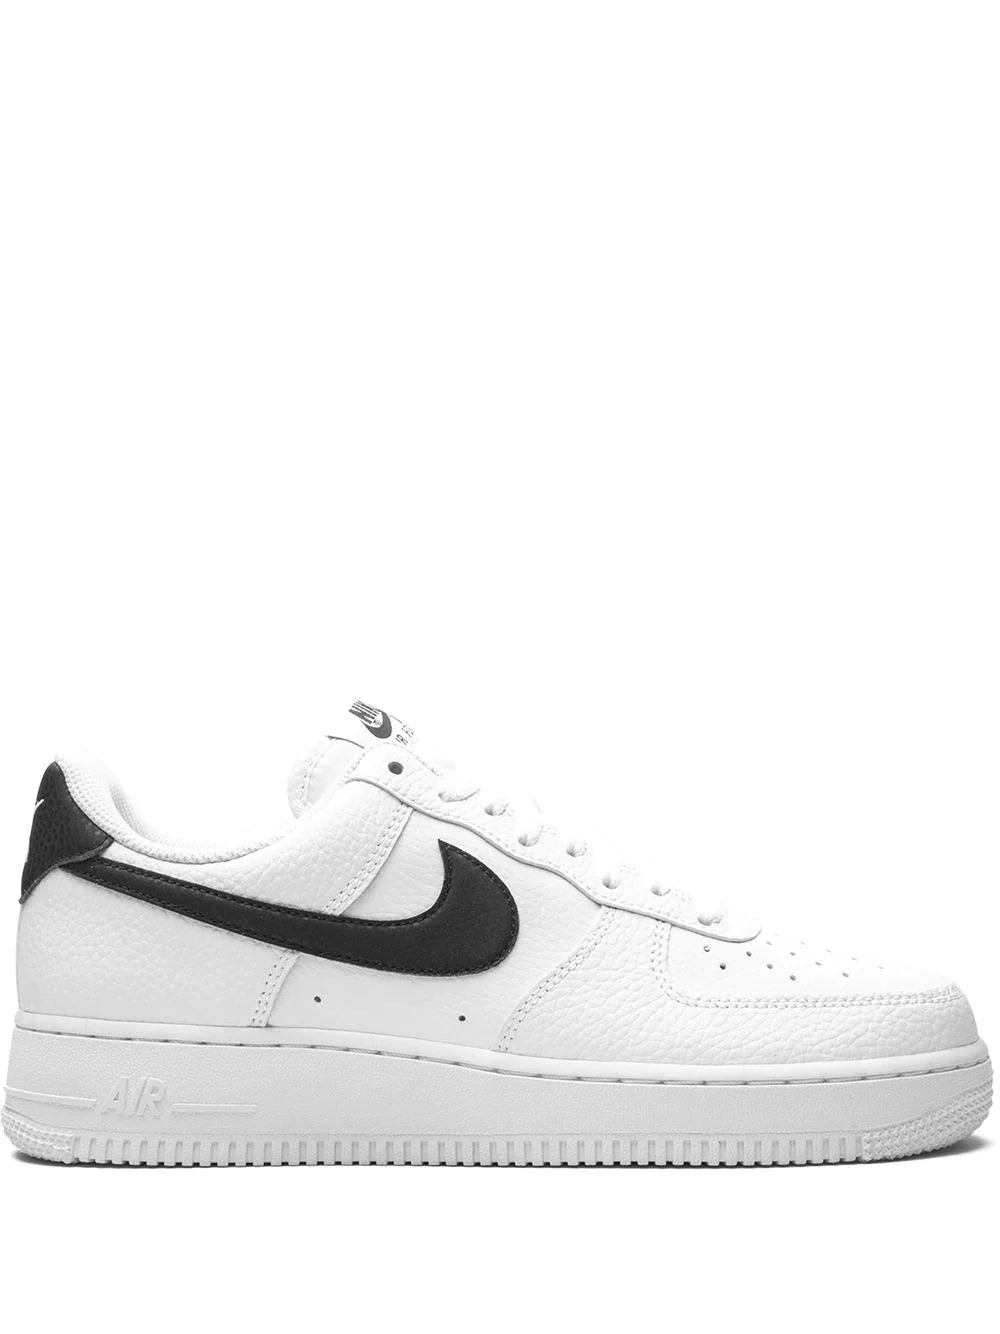 Air Force 1 Low ’07 “White/Black”